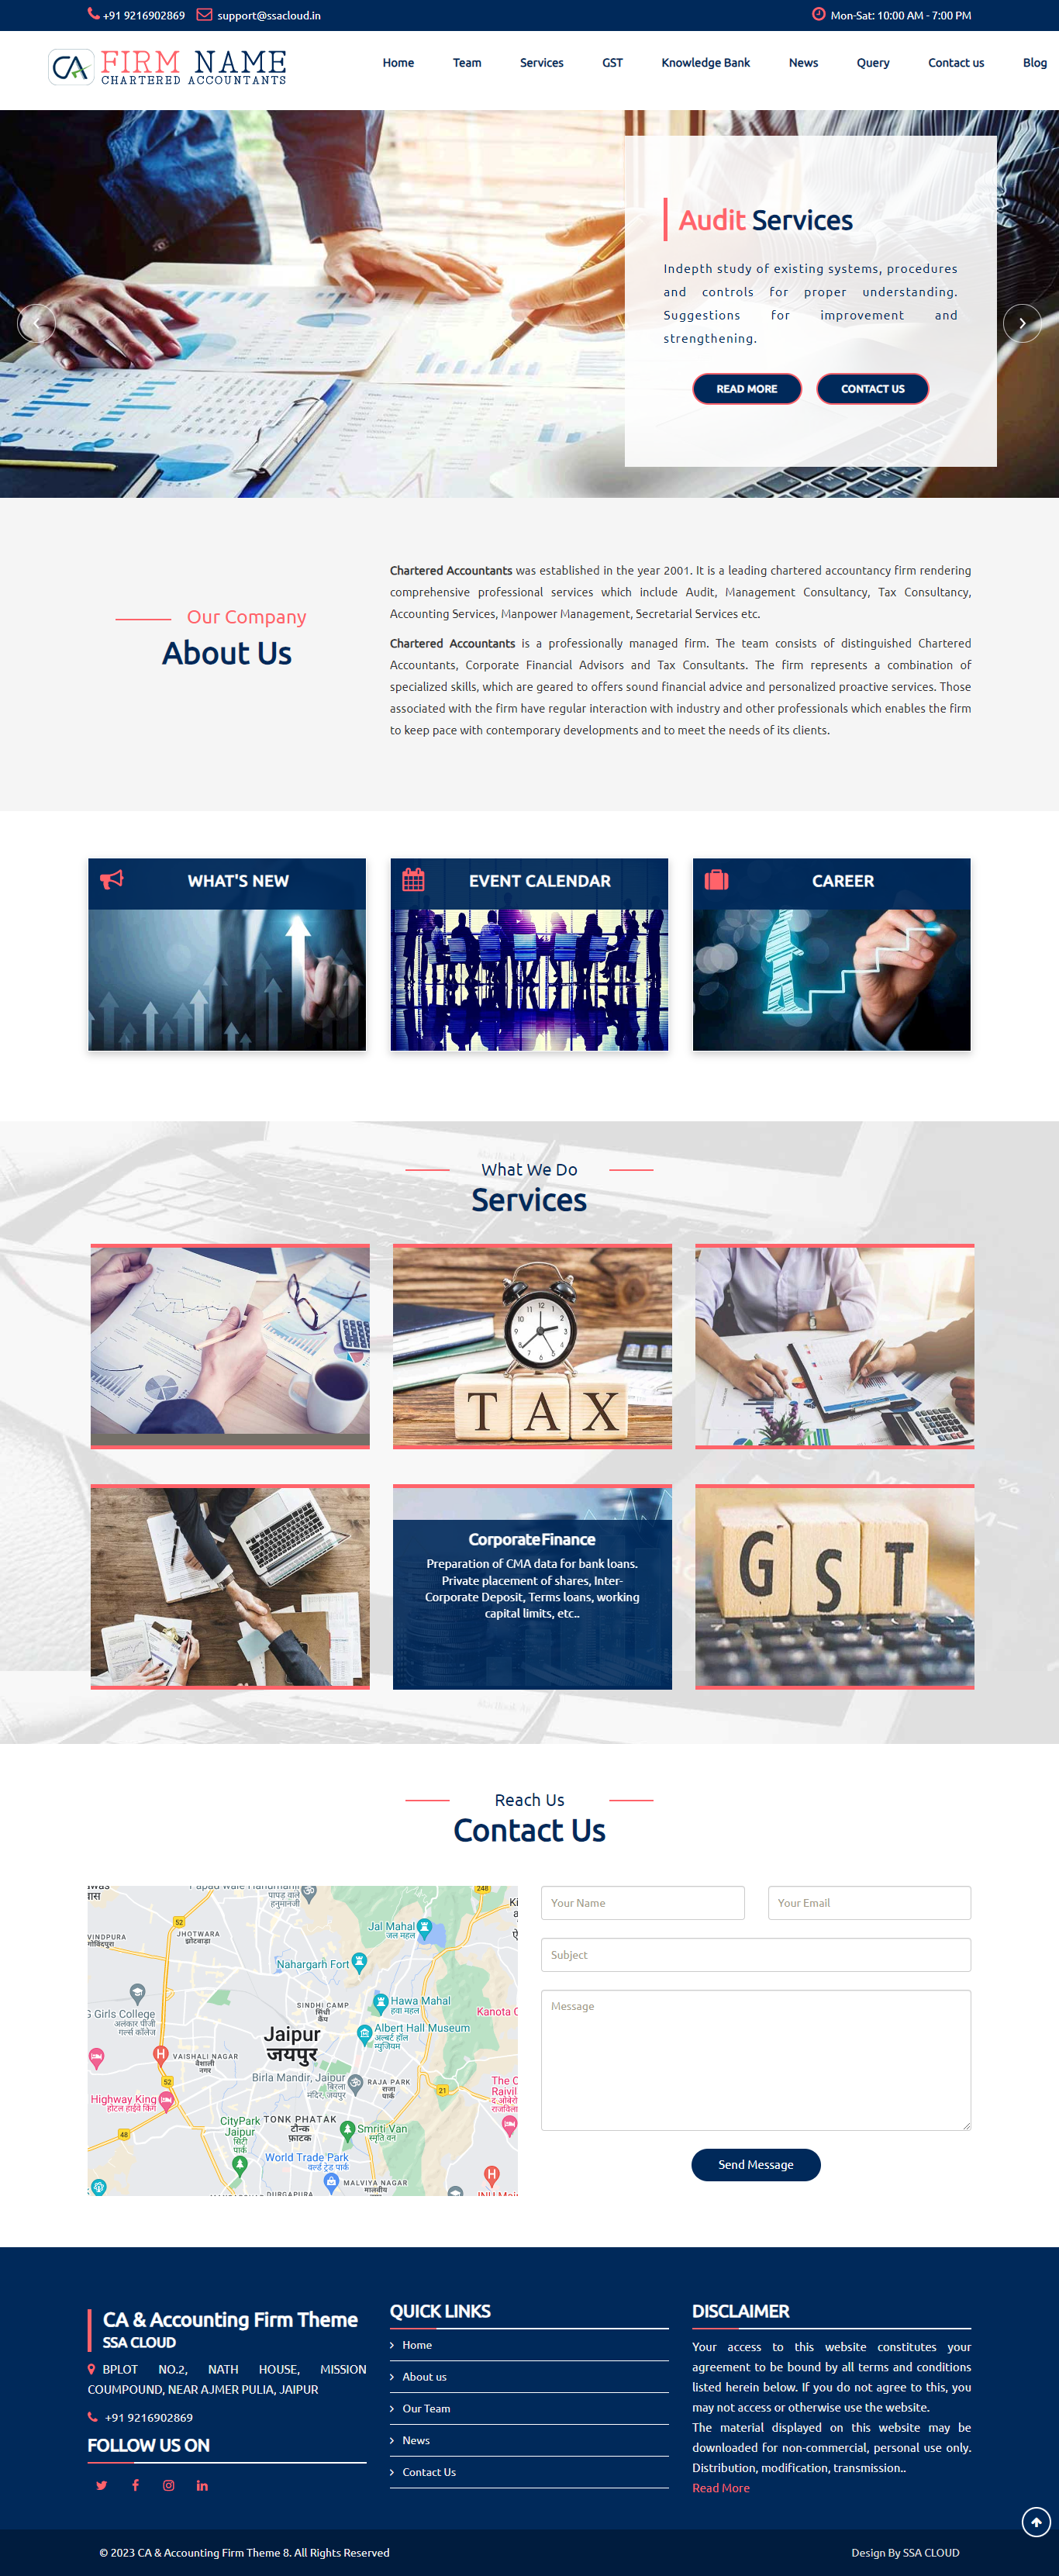 CA & Accounting Firm Theme 8